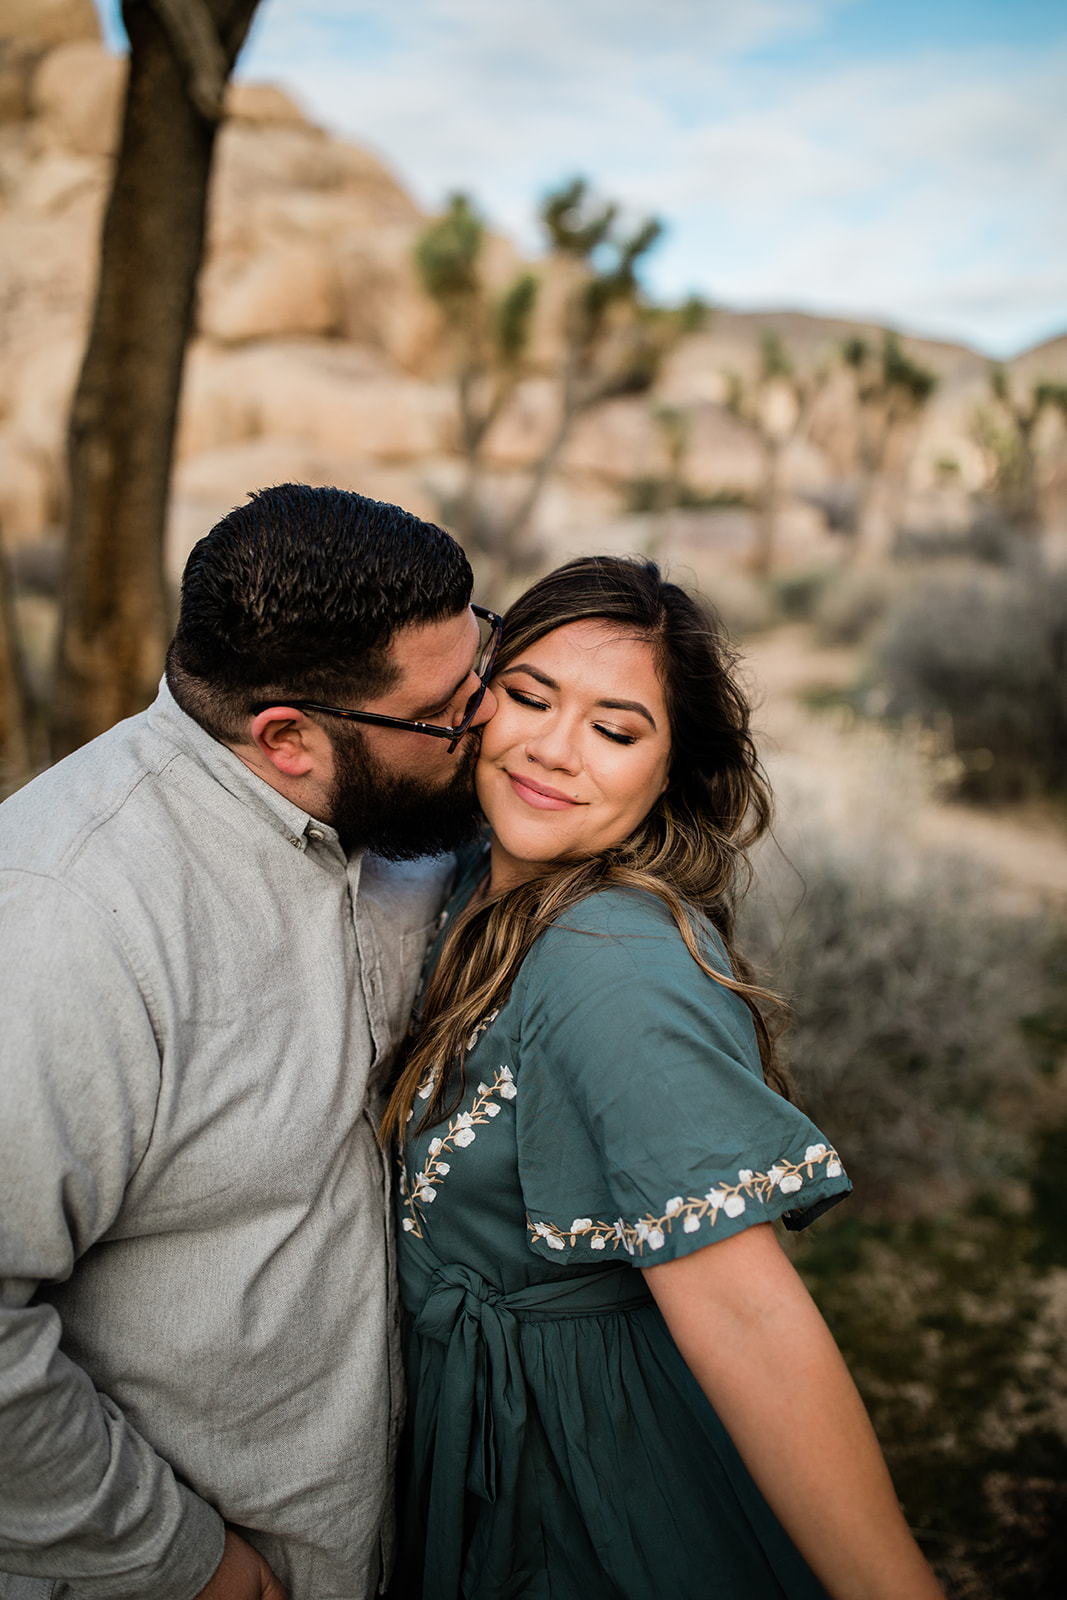 man kisses woman on the cheek in front of a desert background